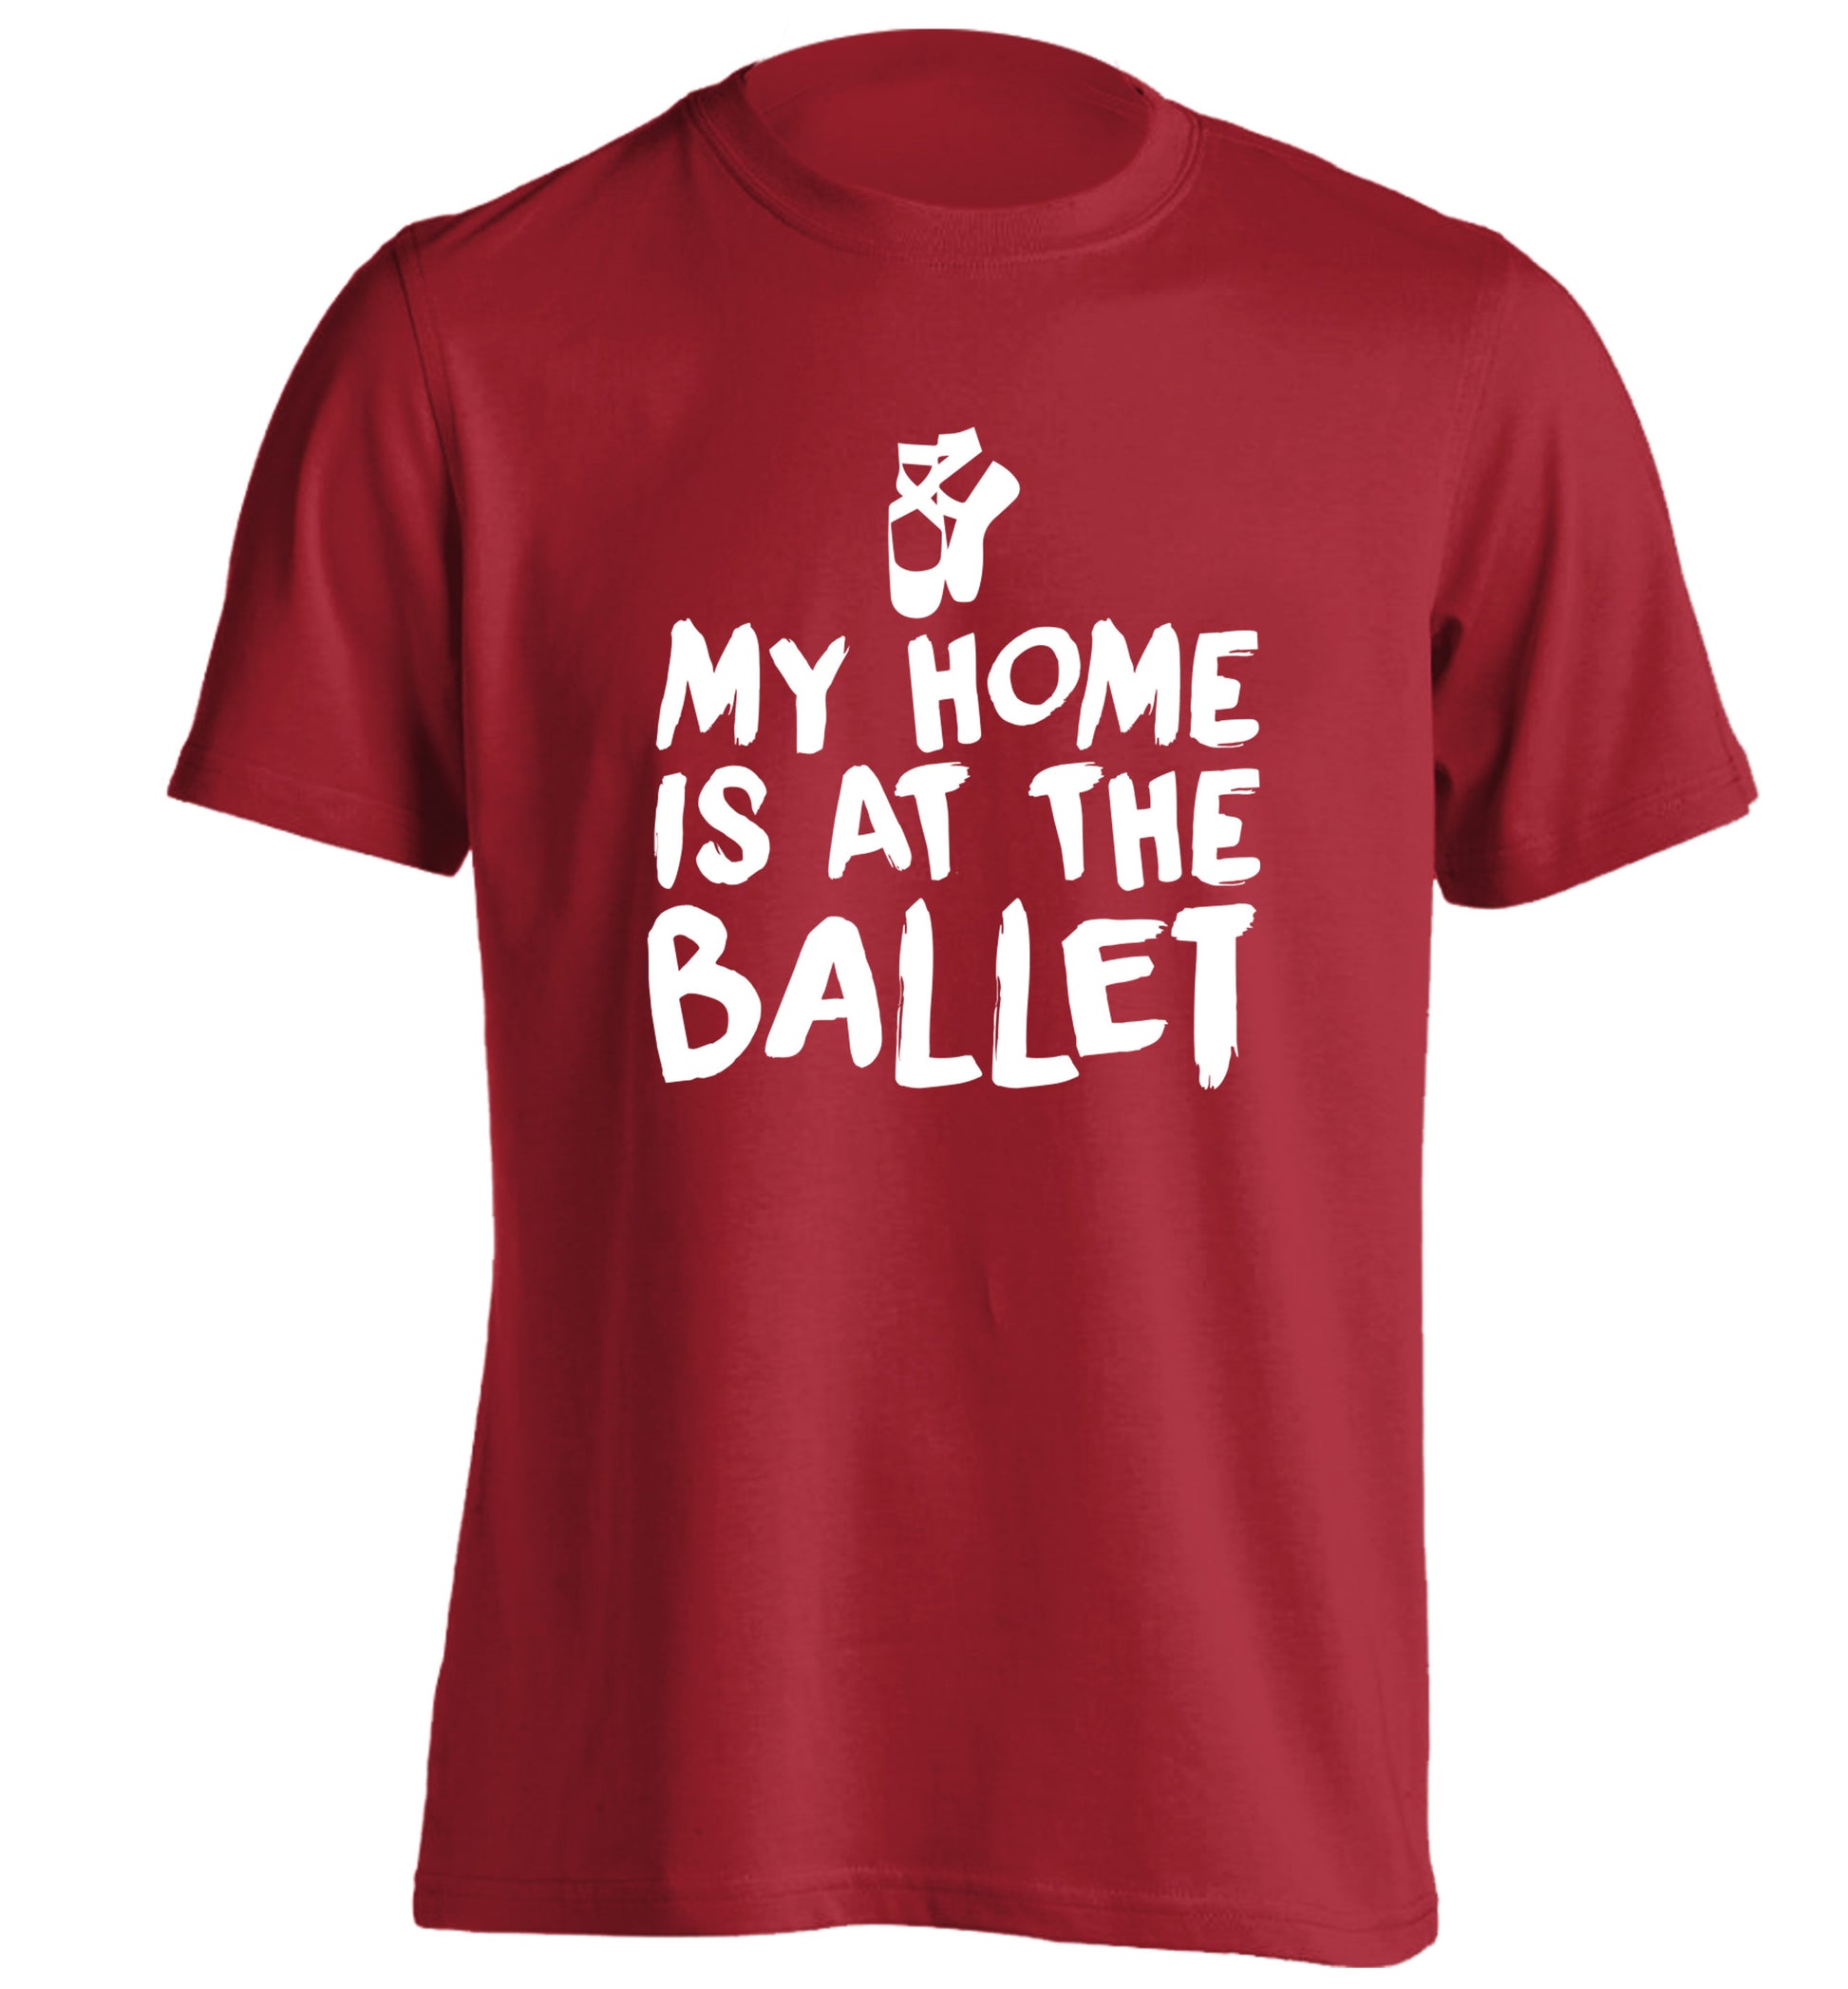 My home is at the dance studio adults unisex red Tshirt 2XL